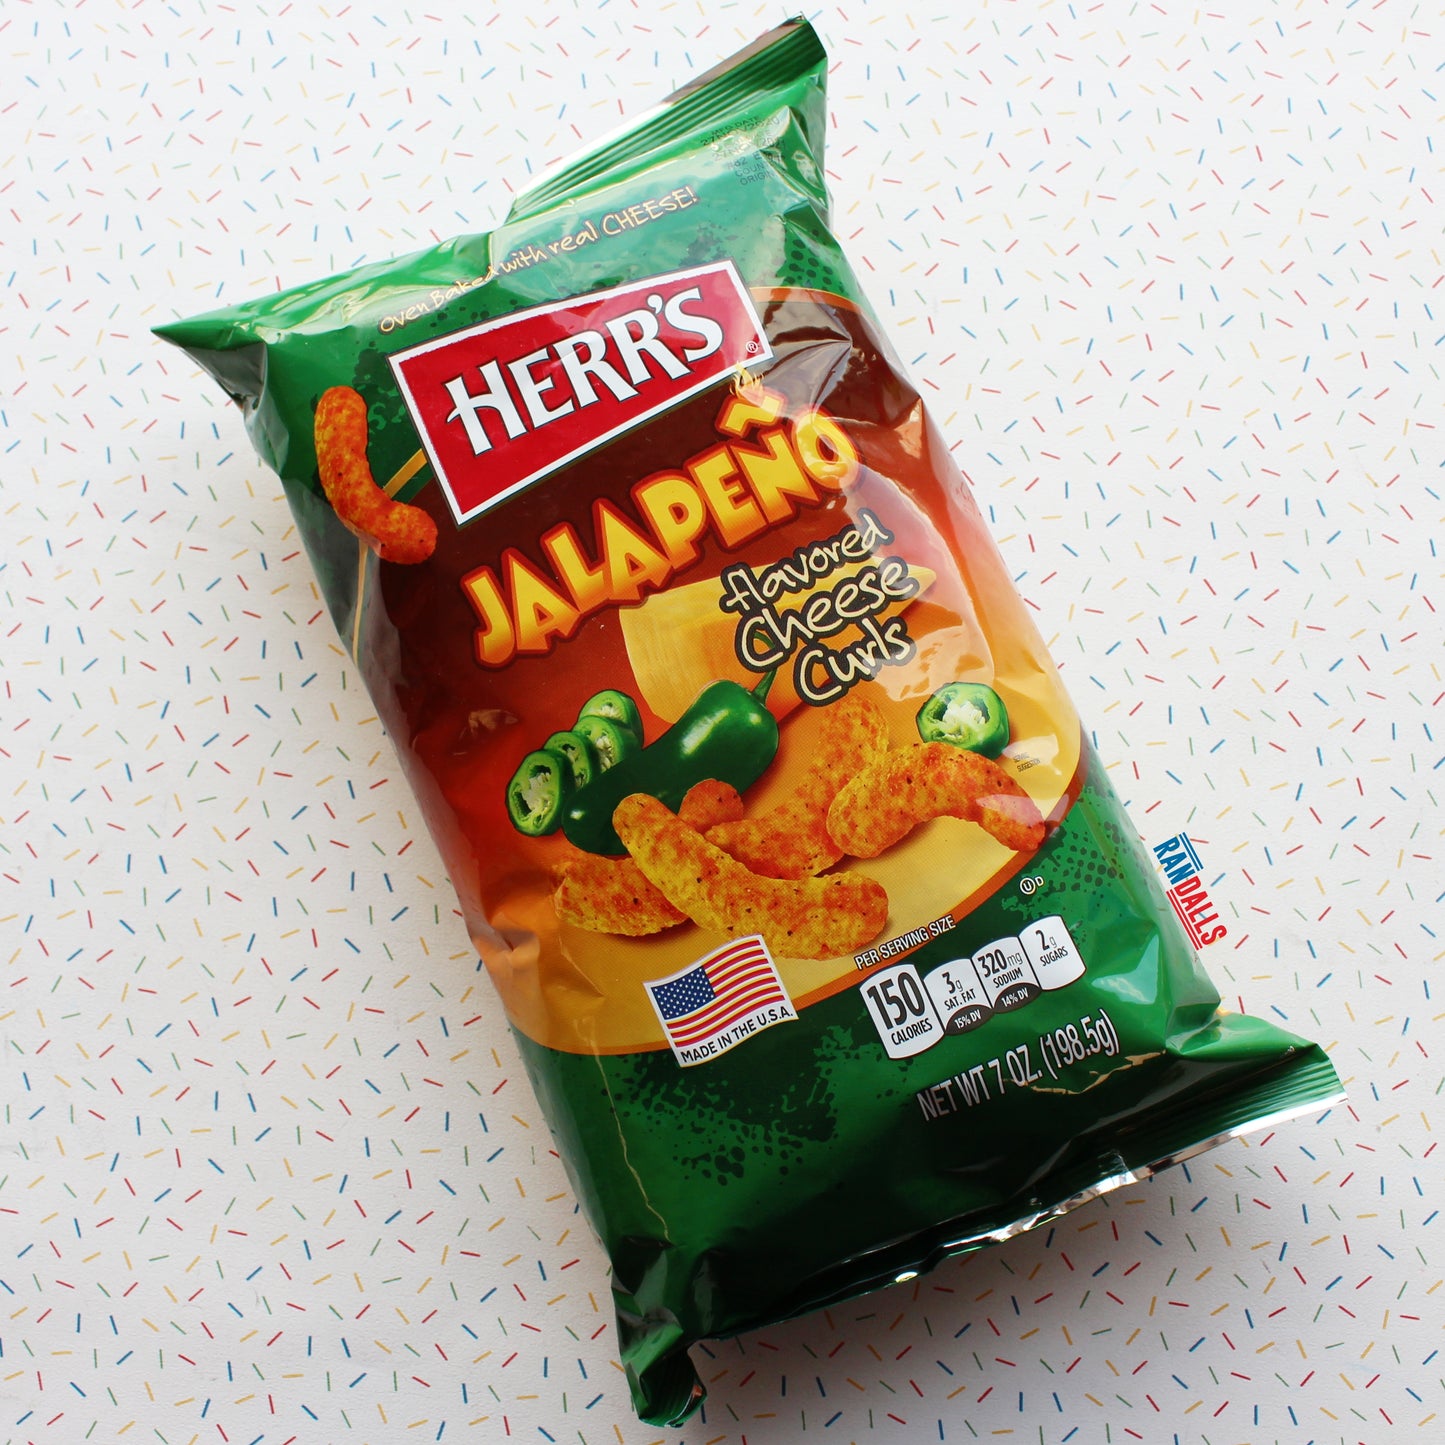 herrs jalapeno cheese curls, herr's, crisps, cheese puffs, chips, usa, spicy, hot, randalls